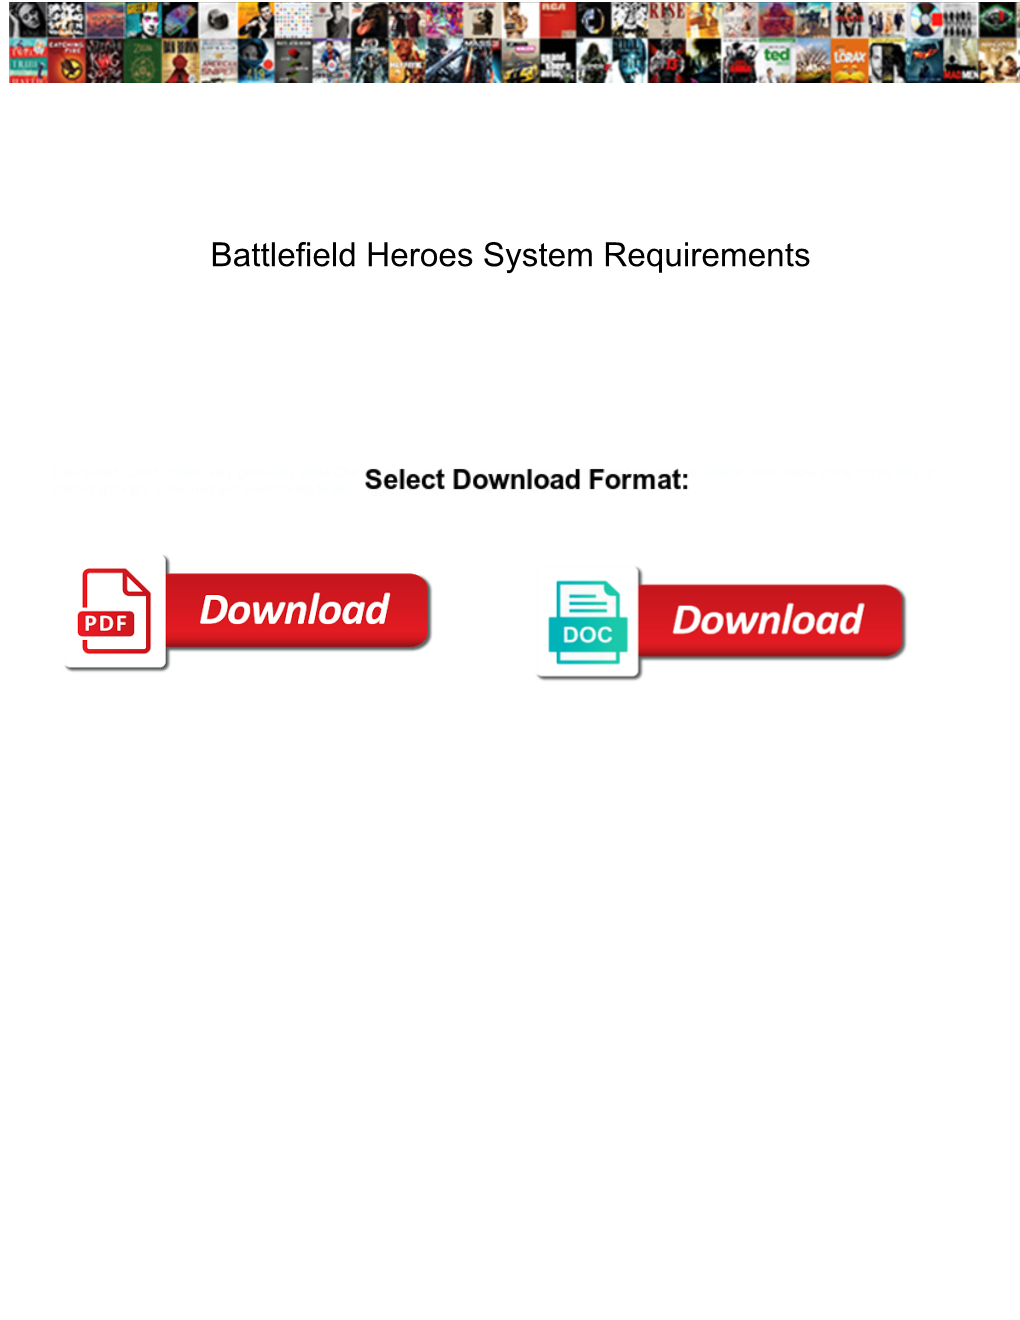 Battlefield Heroes System Requirements